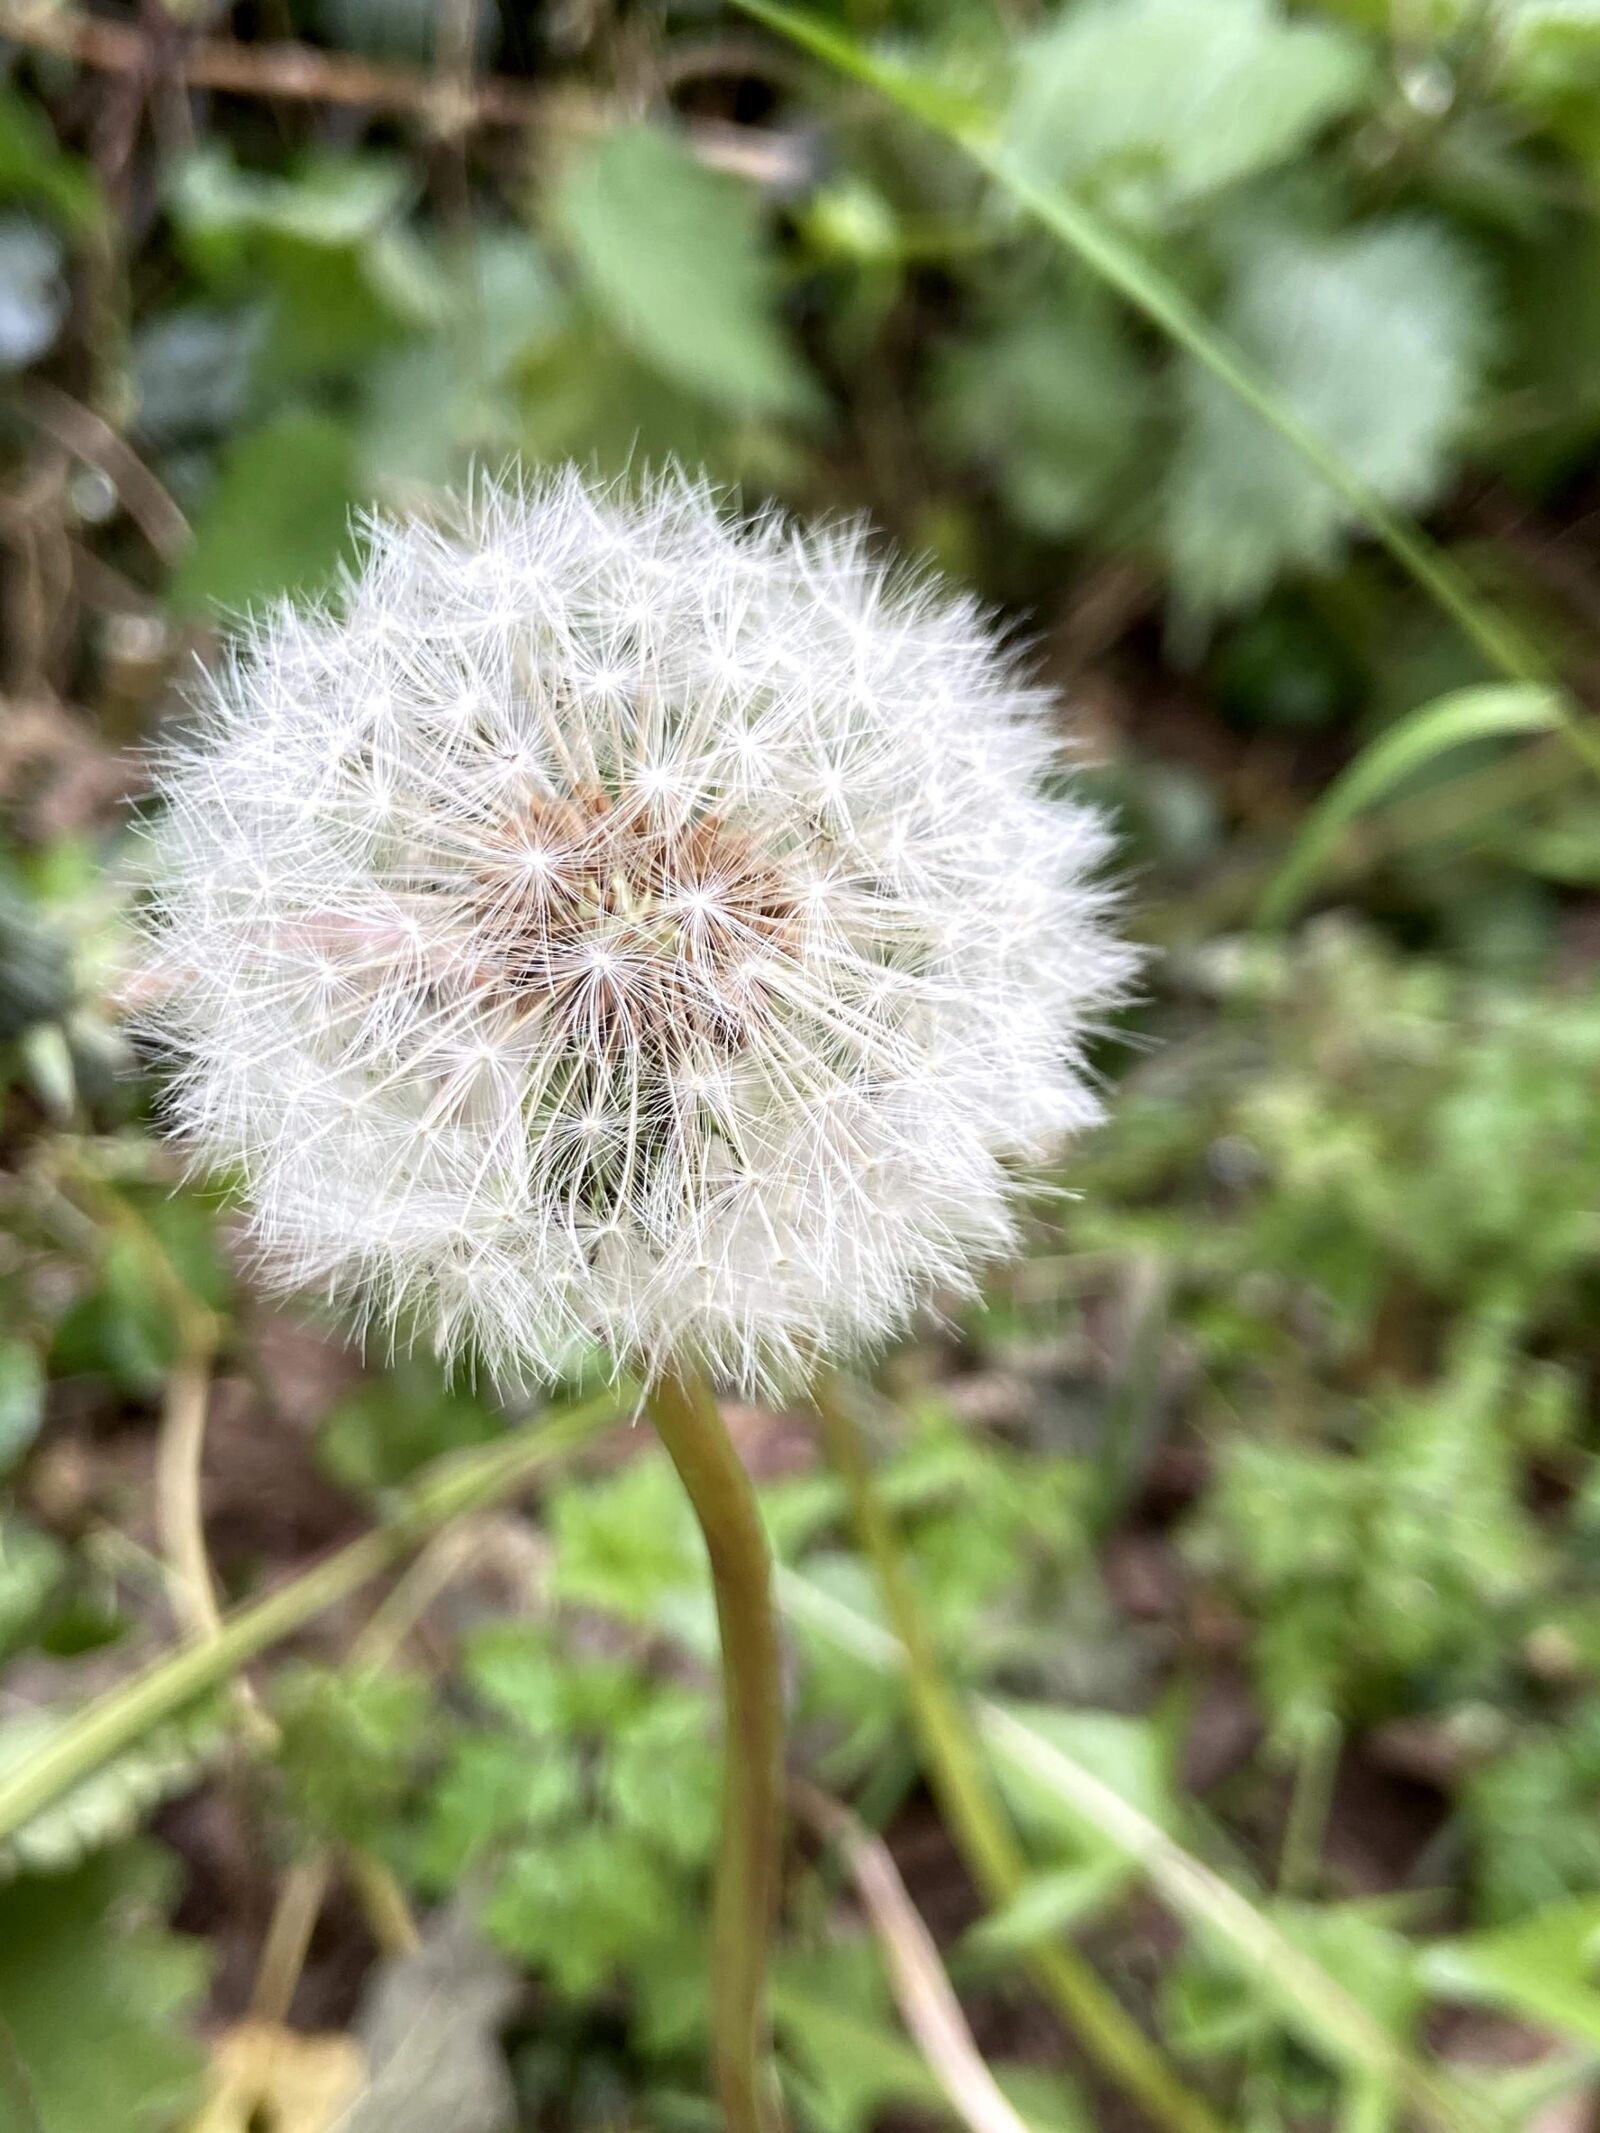 iPhone 11 back dual wide camera 4.25mm f/1.8 sample photo. Dandelion, countryside, weed photography